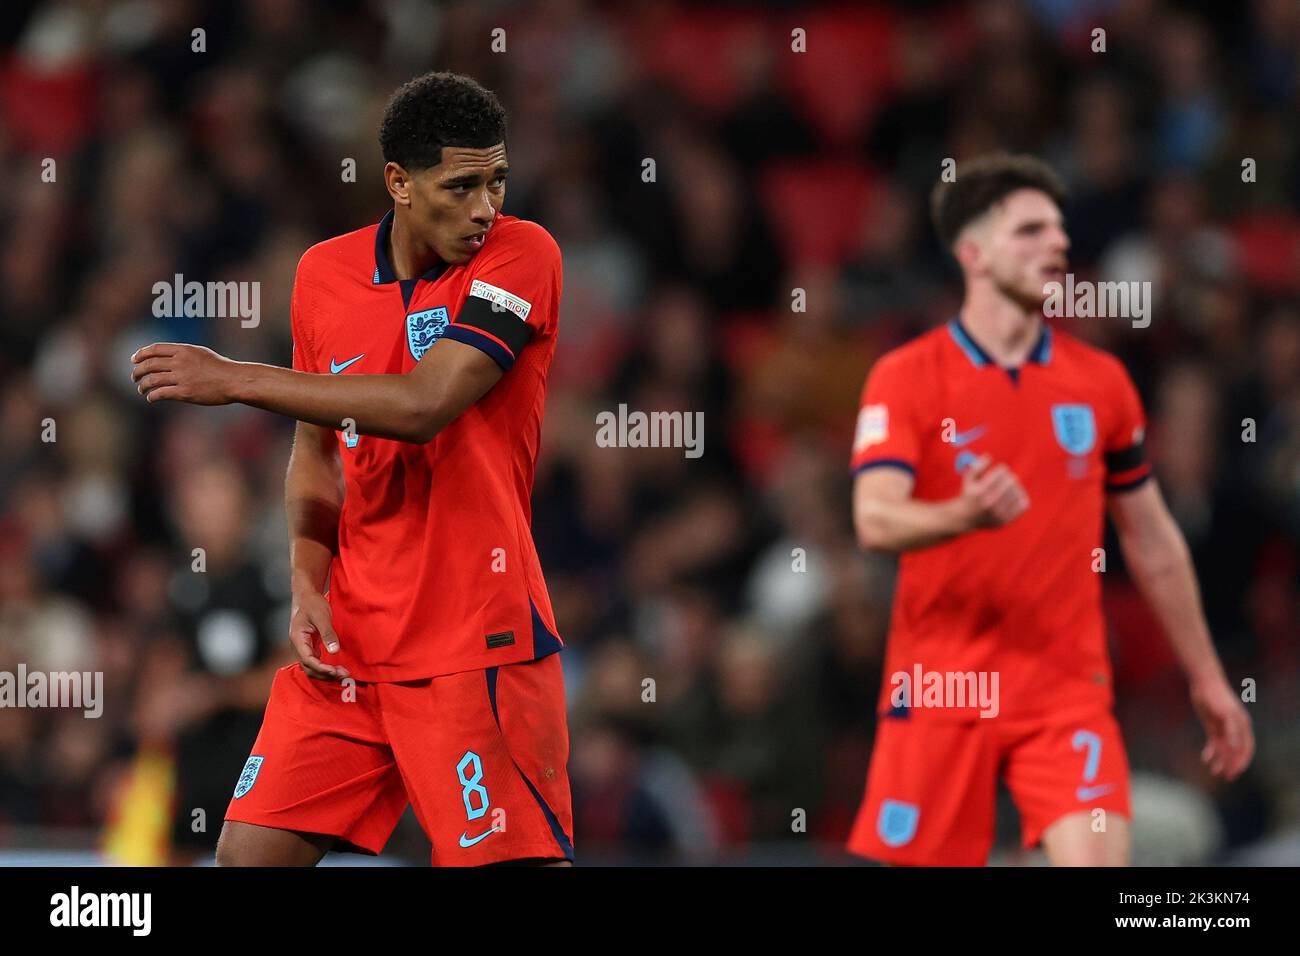 London, UK. 26th Sep, 2022. Jude Bellingham of England looks on. England v Germany, UEFA Nations league International group C match at Wembley Stadium in London on Monday 26th September 2022. Editorial use only. pic by Andrew Orchard/Andrew Orchard sports photography/Alamy Live News Credit: Andrew Orchard sports photography/Alamy Live News Stock Photo